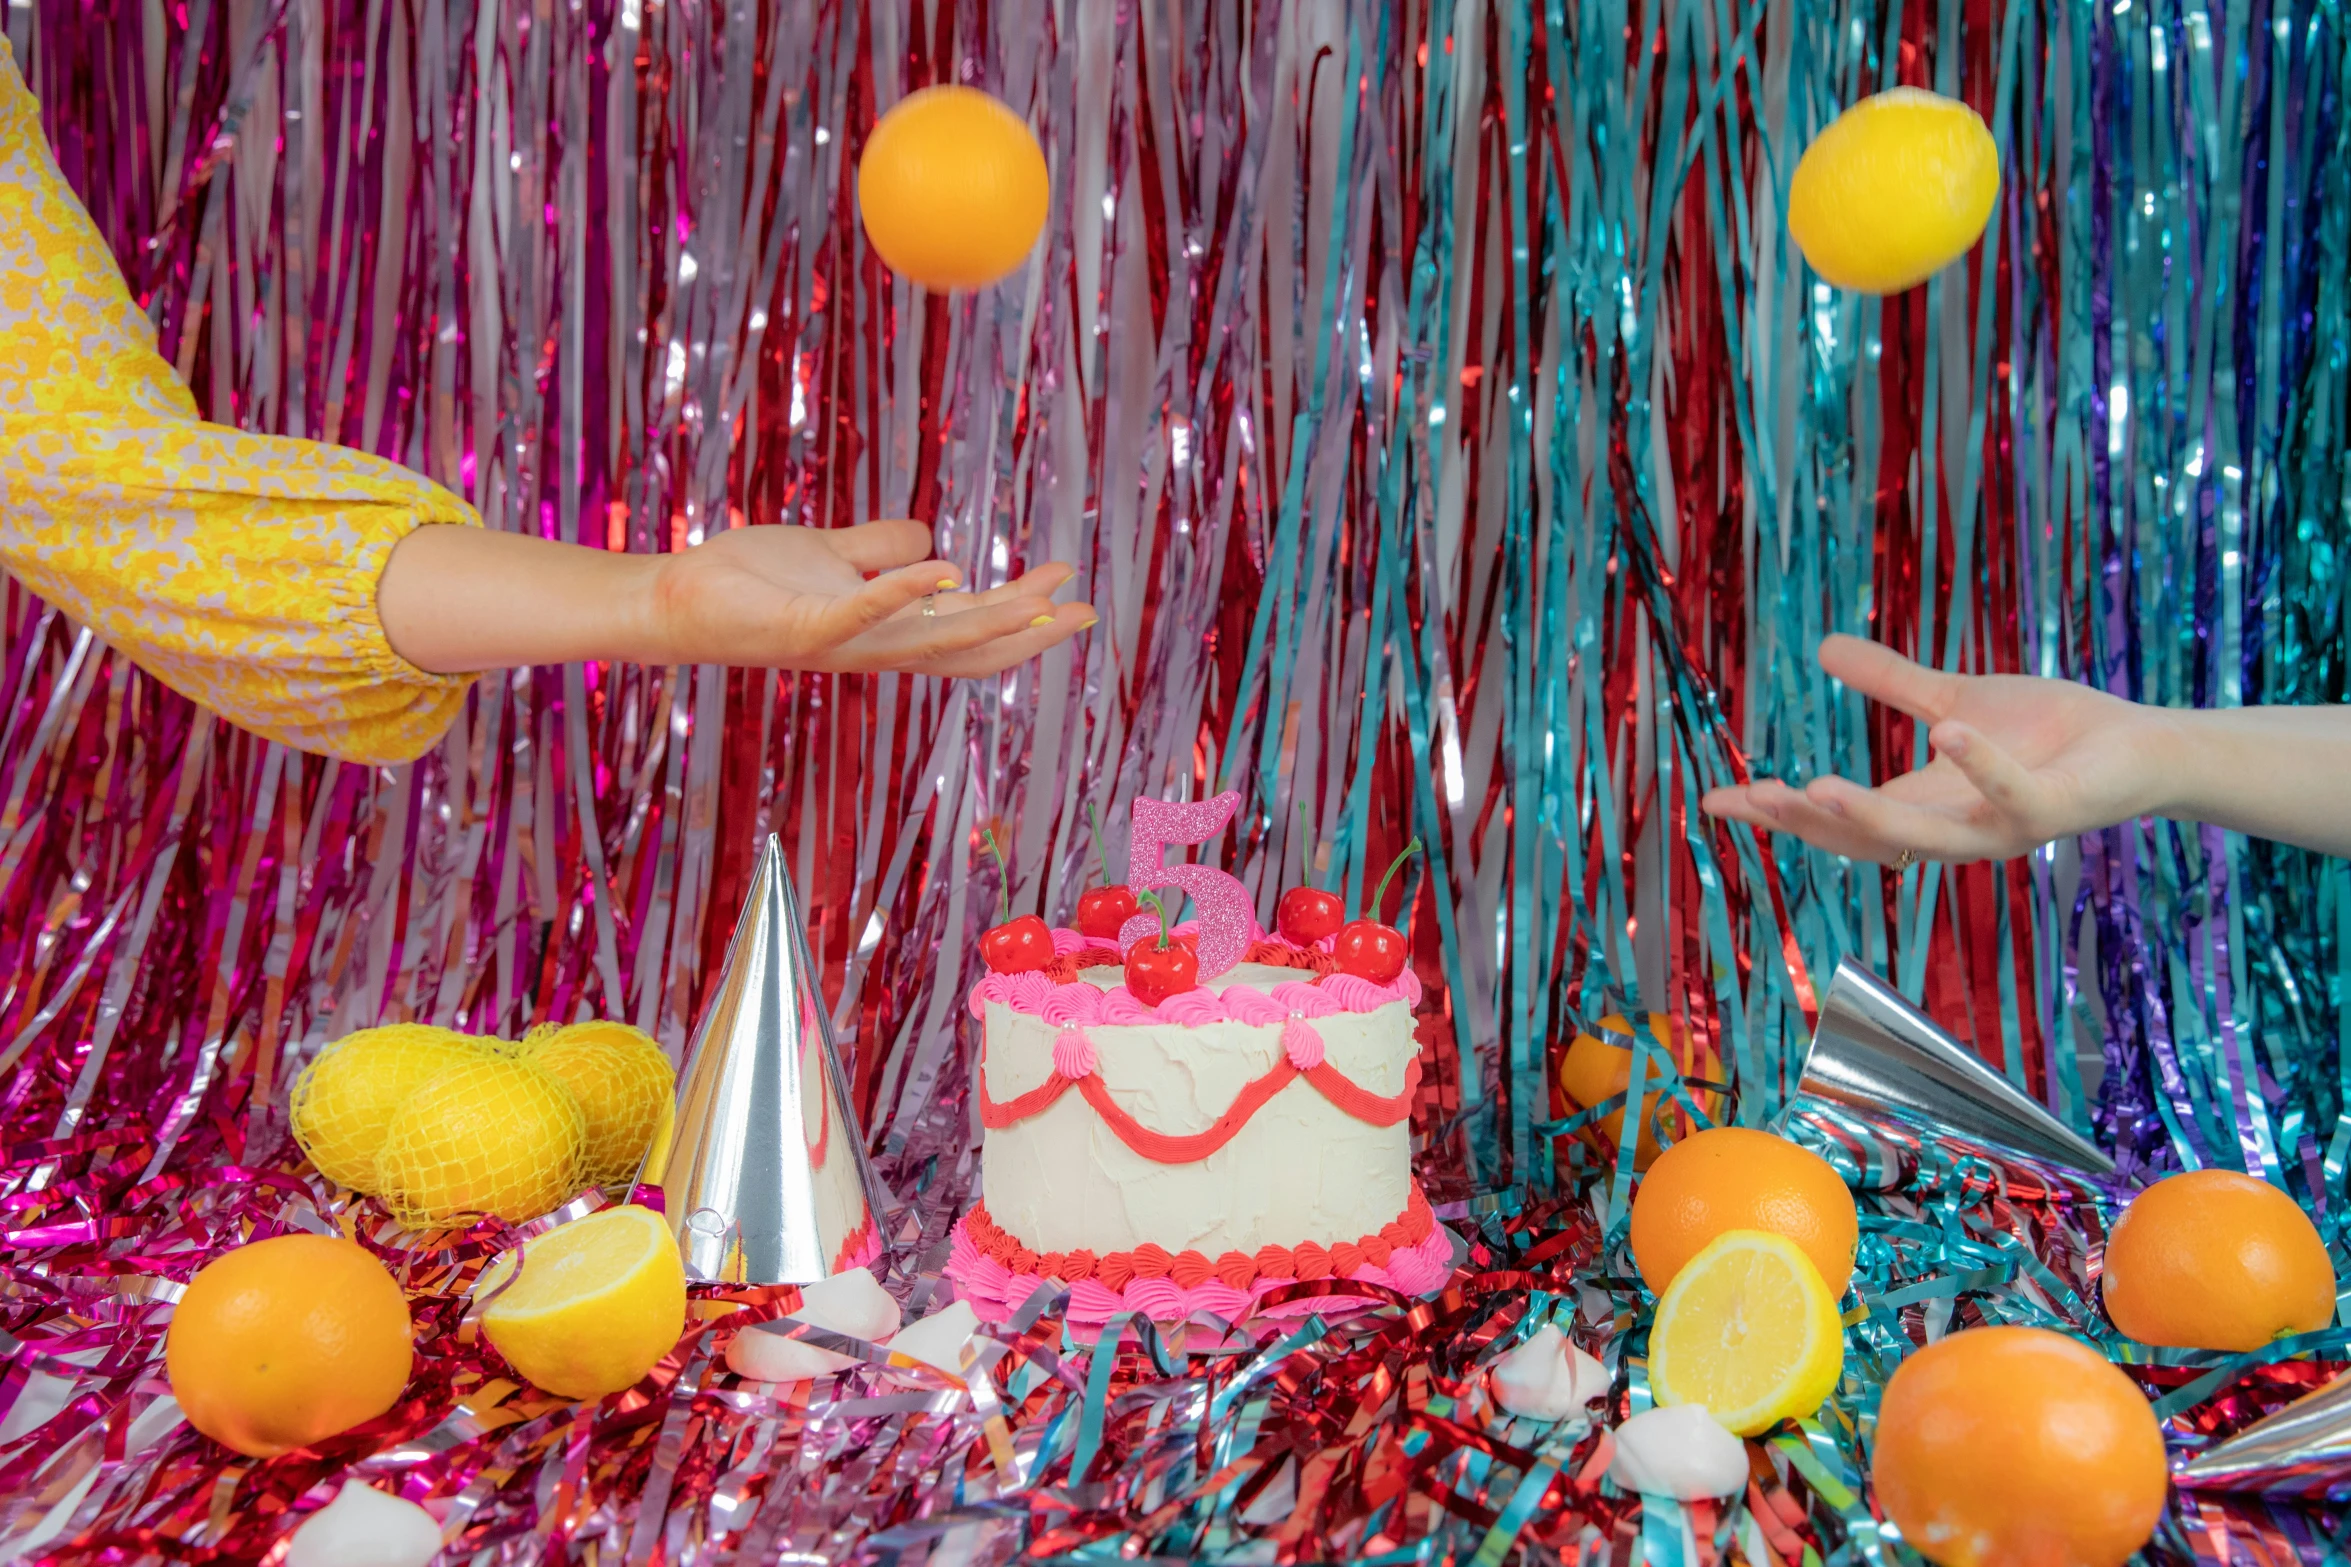 a woman is reaching for a birthday cake